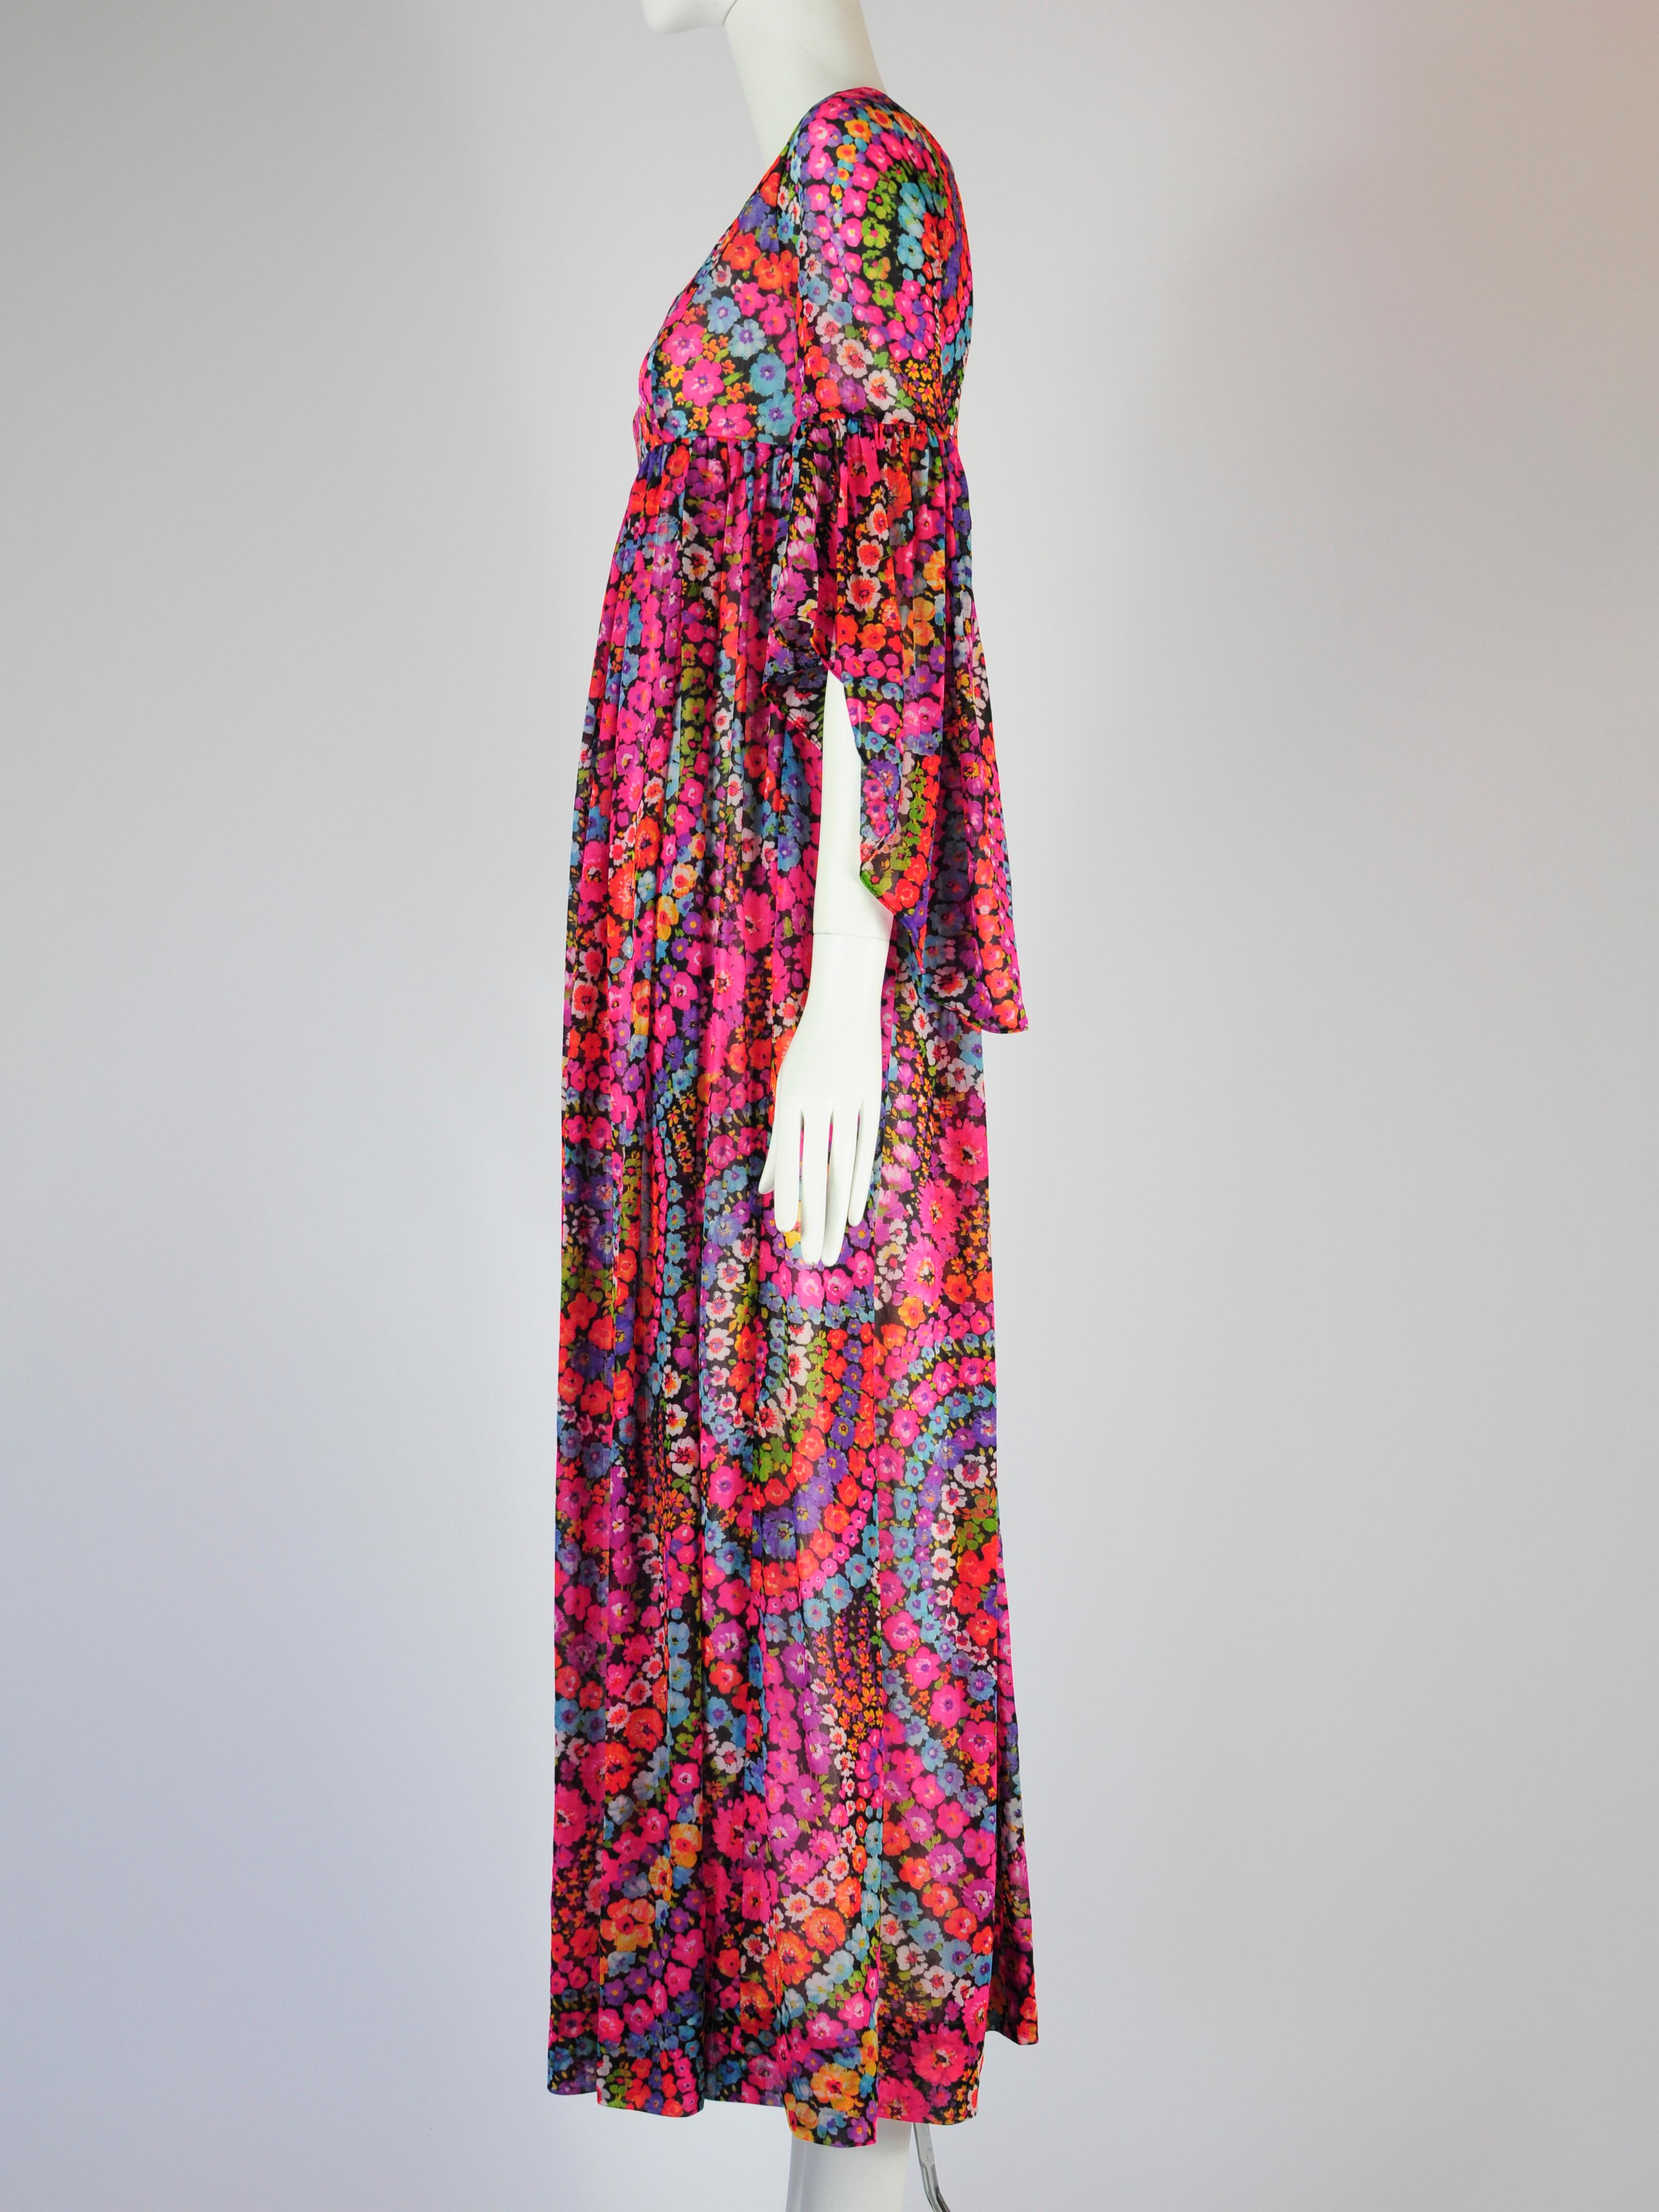 Psychedelic Flower Goddess Dress Empire Waist Butterfly Sleeve Quad London 1970s For Sale 1